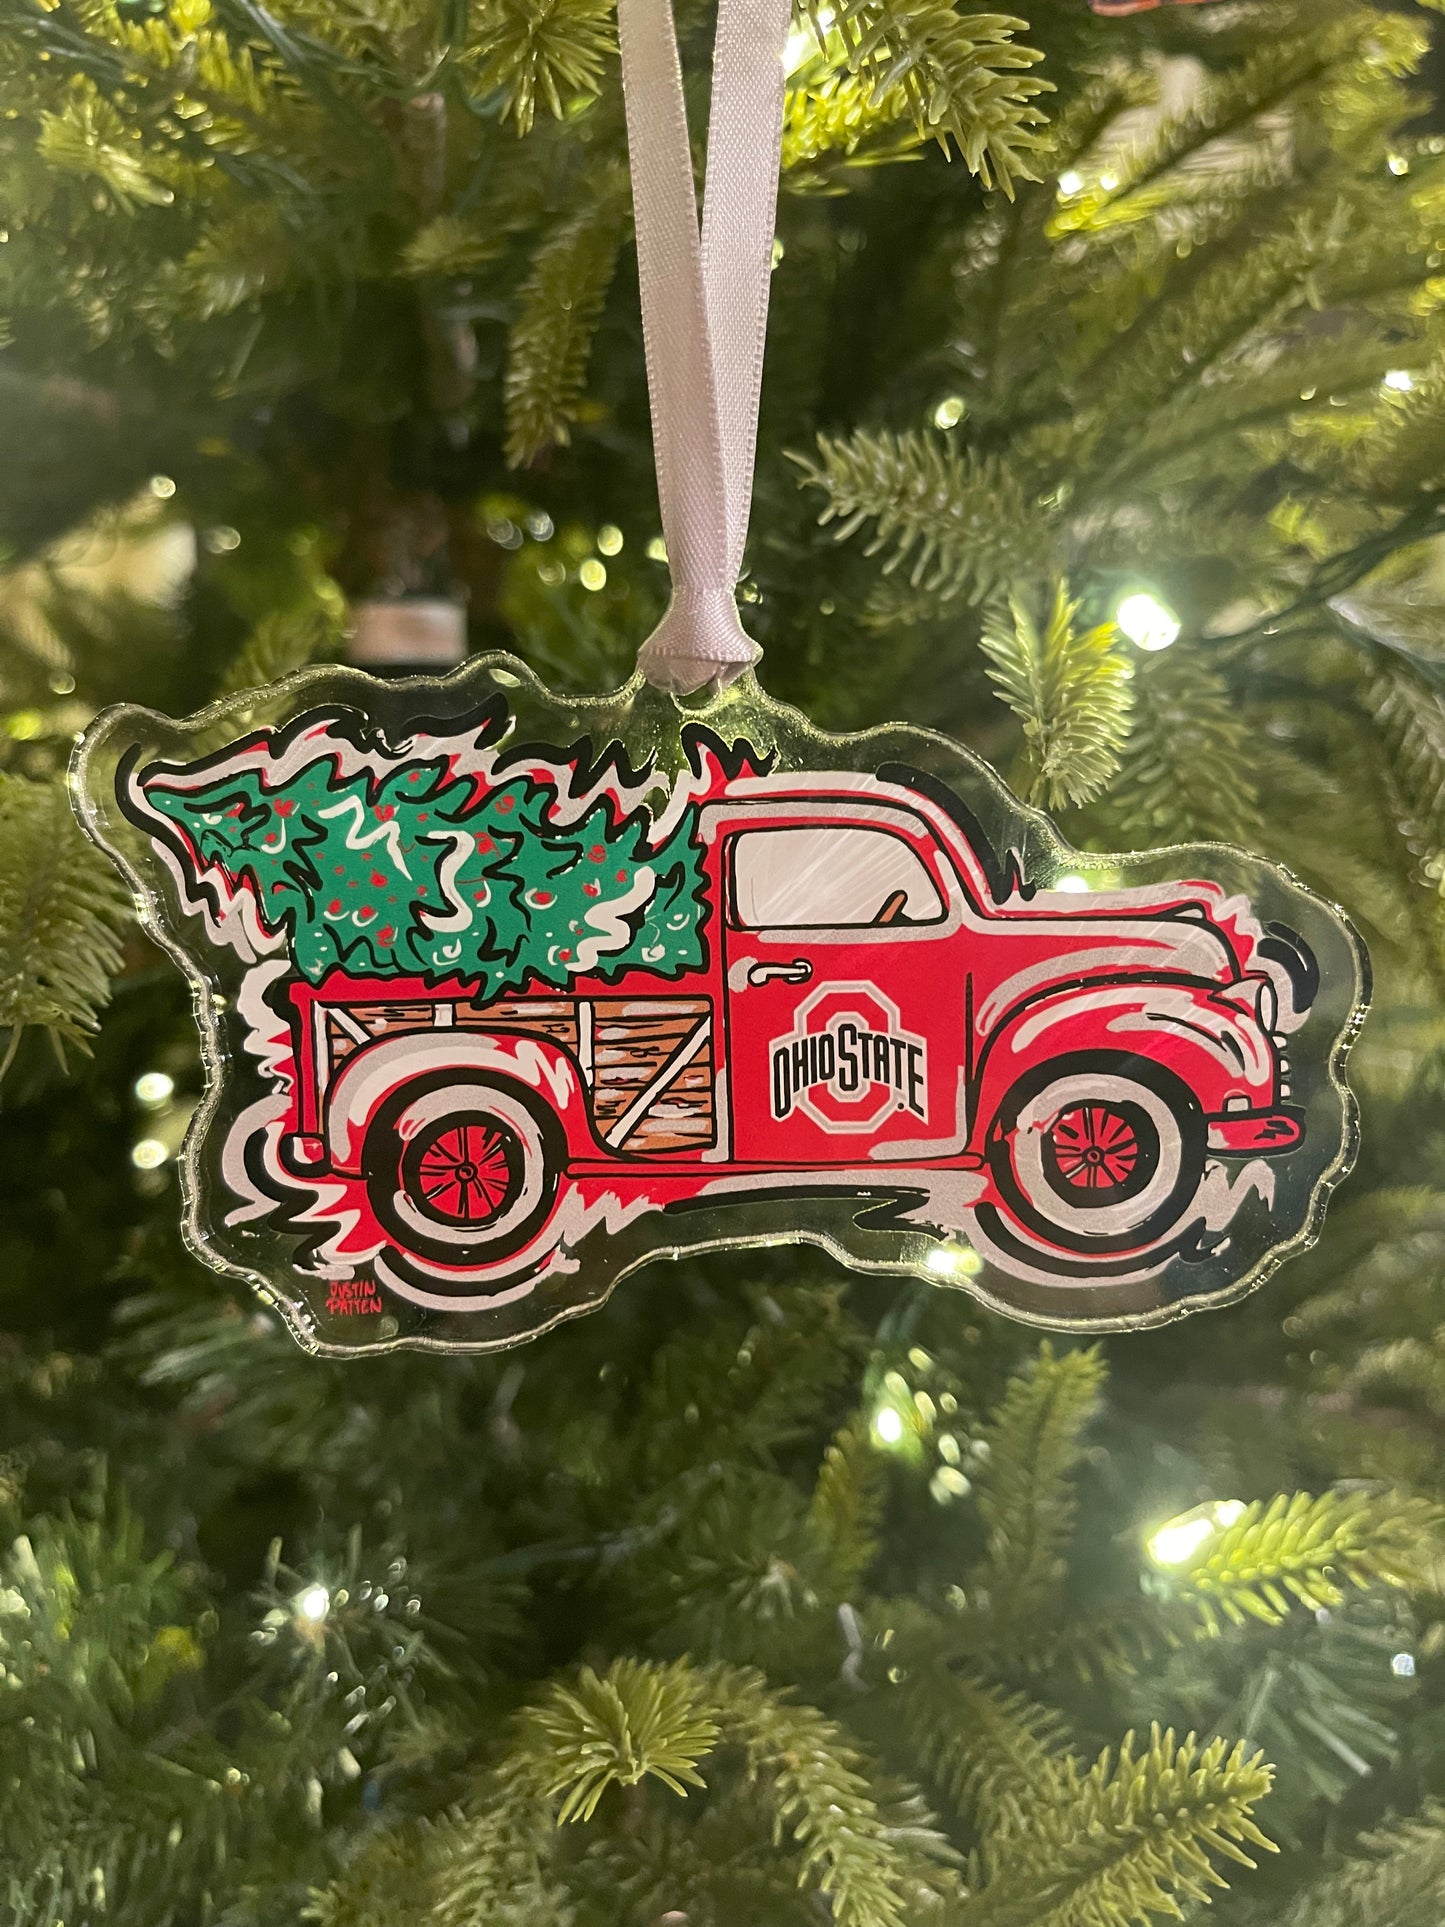 The Ohio State University Christmas Truck Ornament by Justin Patten